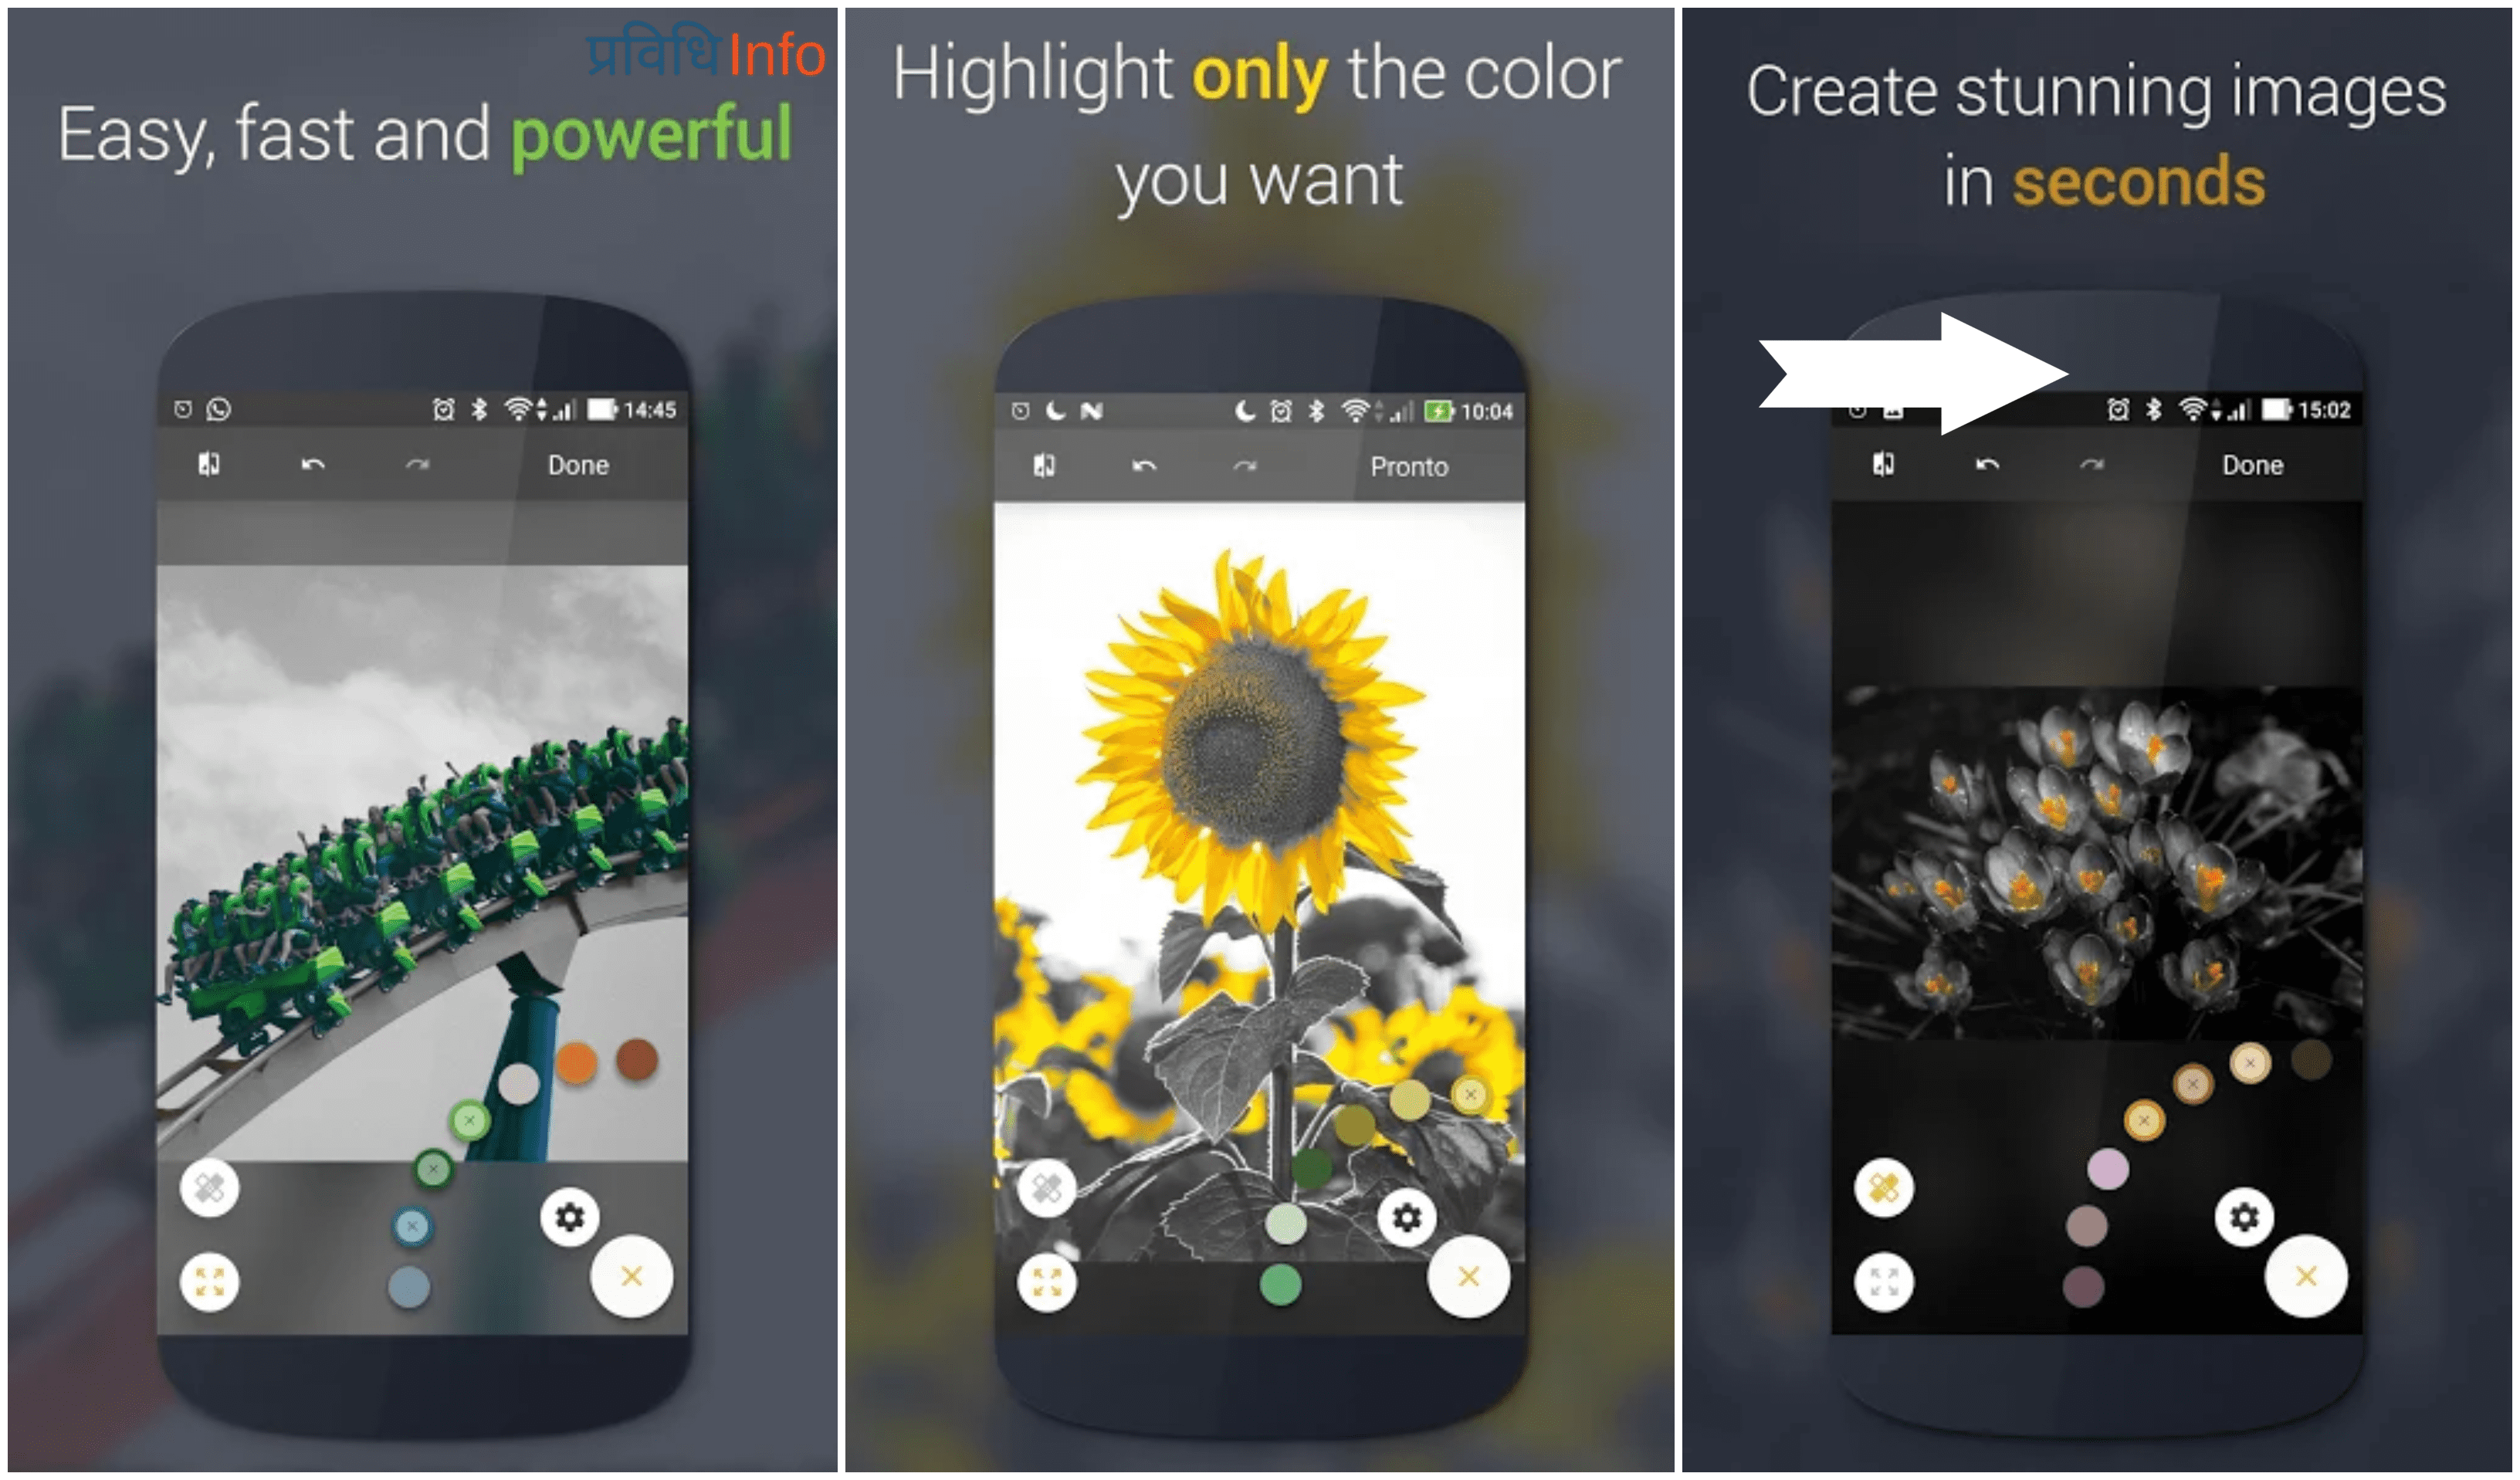 Paletta - Top 10 Unique & Best Free Android Apps – February 2019